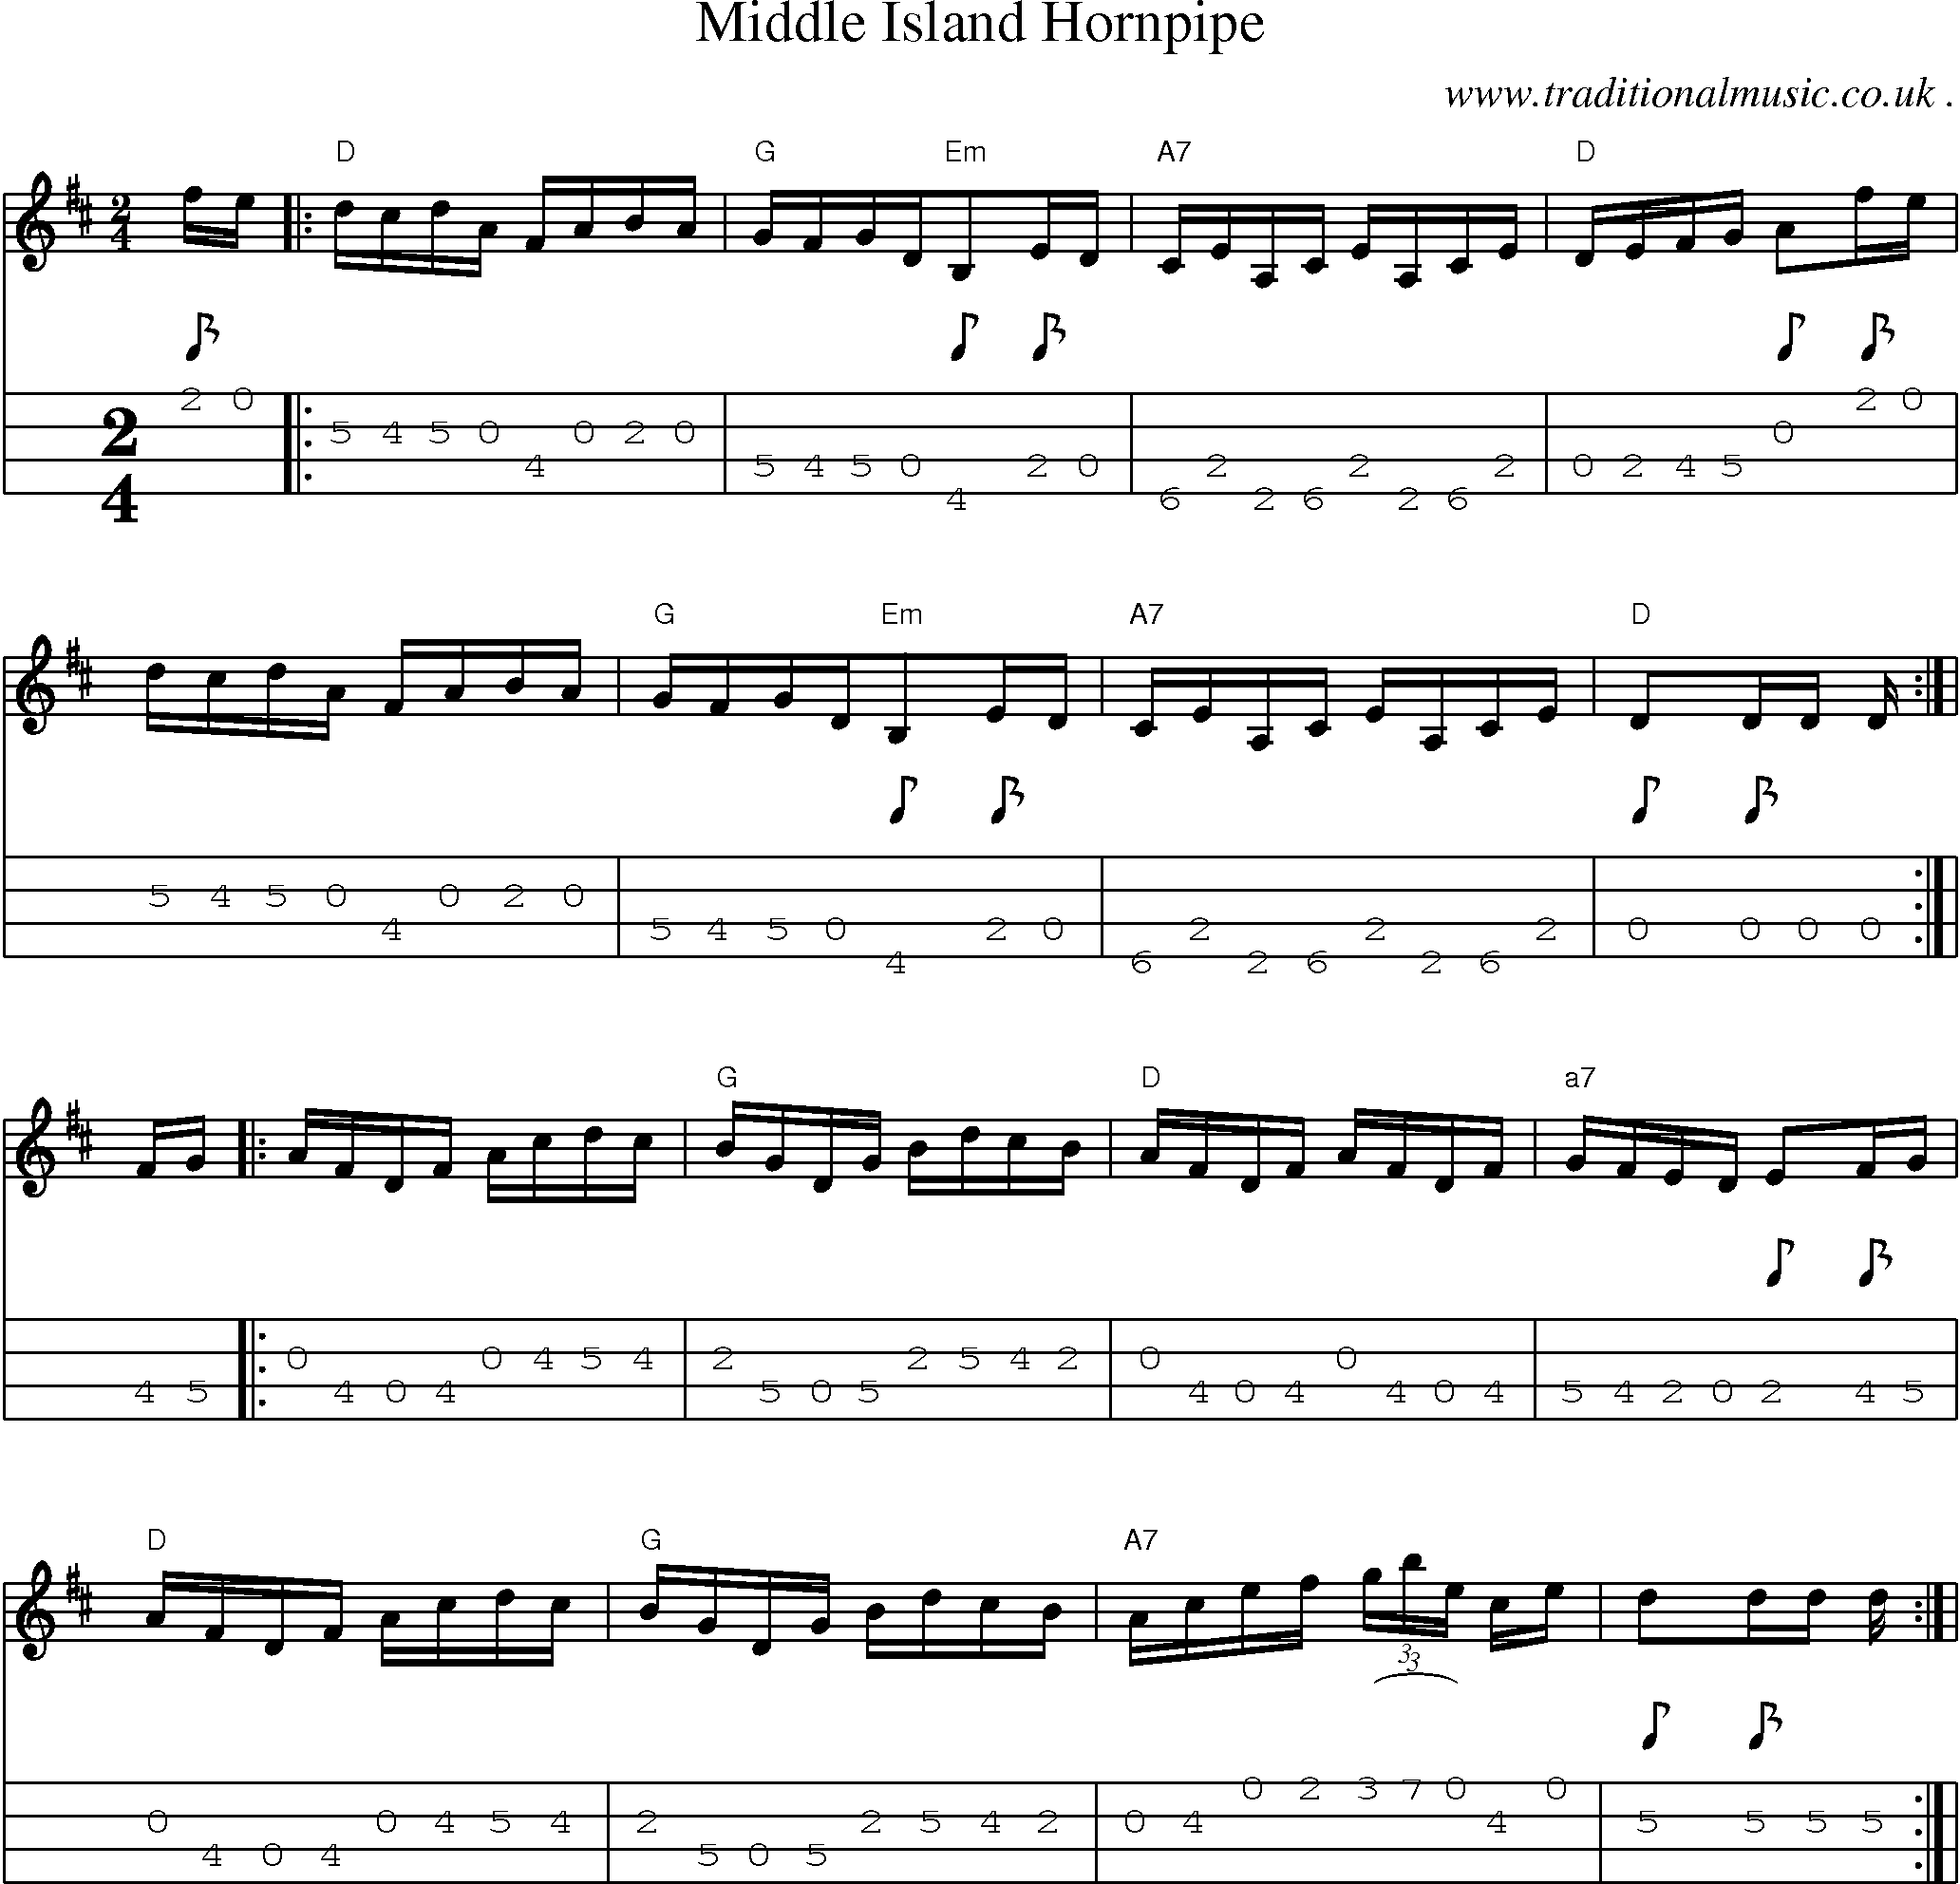 Sheet-Music and Mandolin Tabs for Middle Island Hornpipe